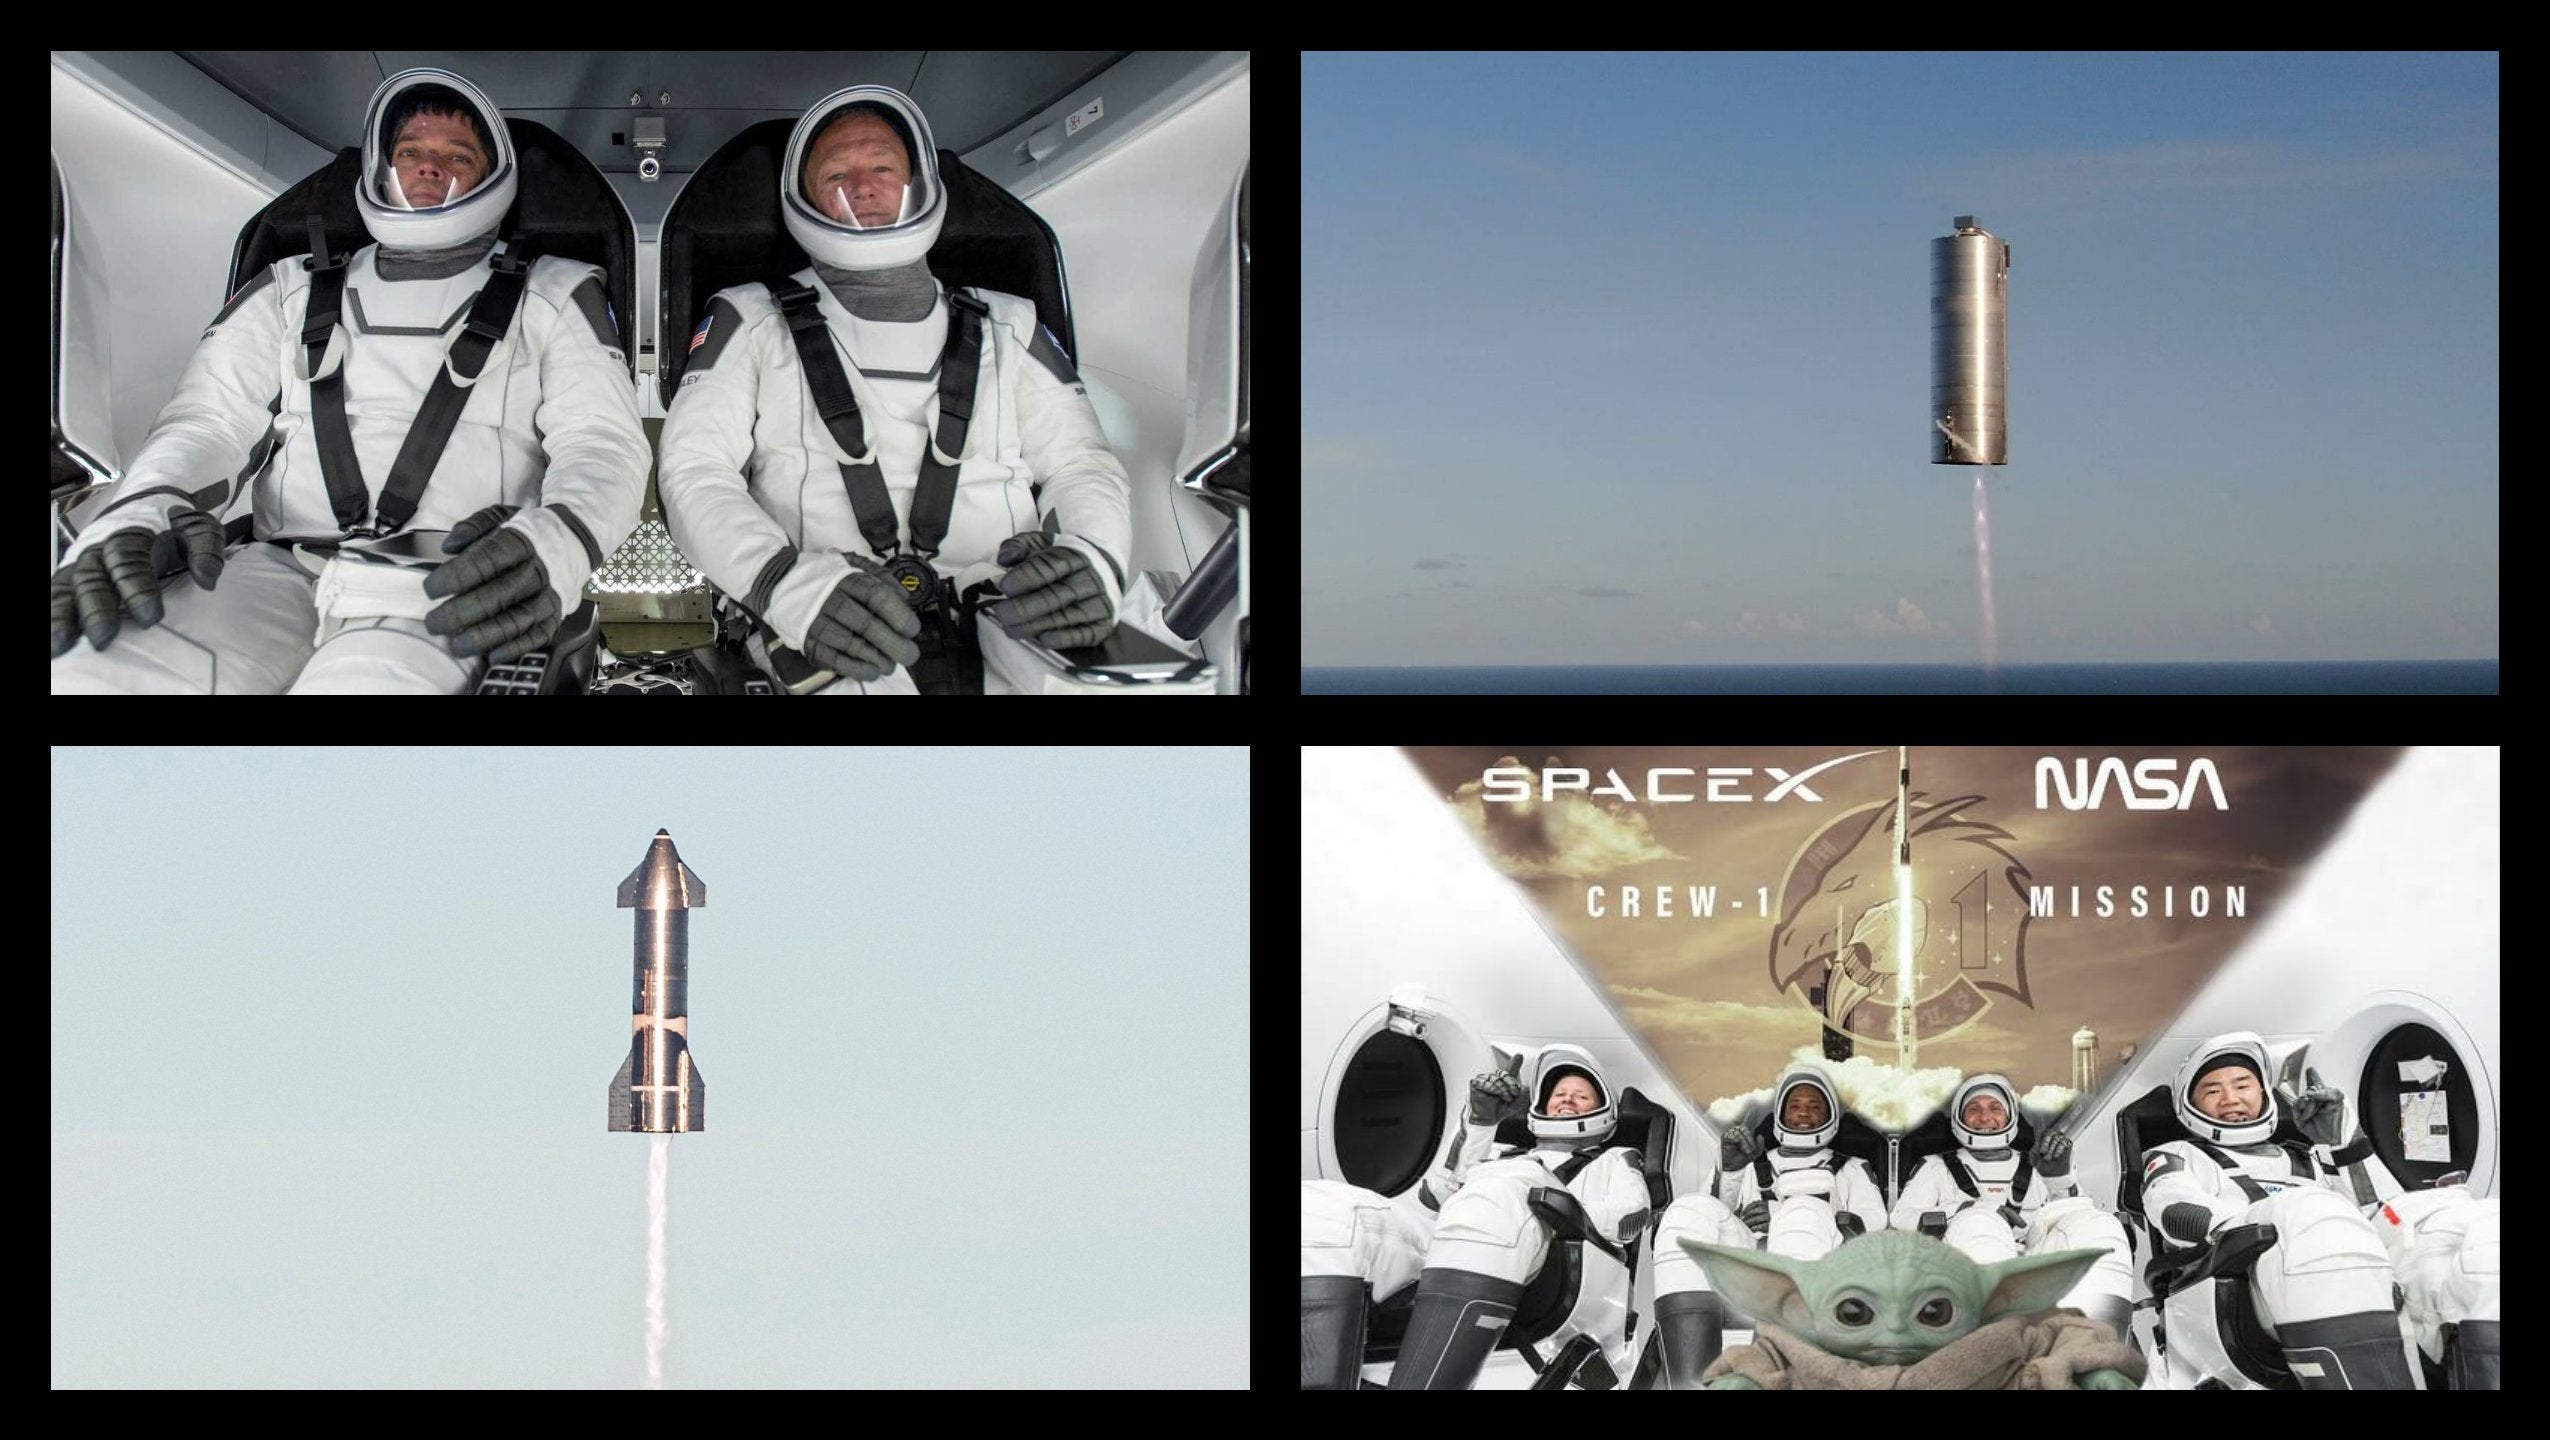 Let’s look back at SpaceX’s greatest accomplishments of 2020!